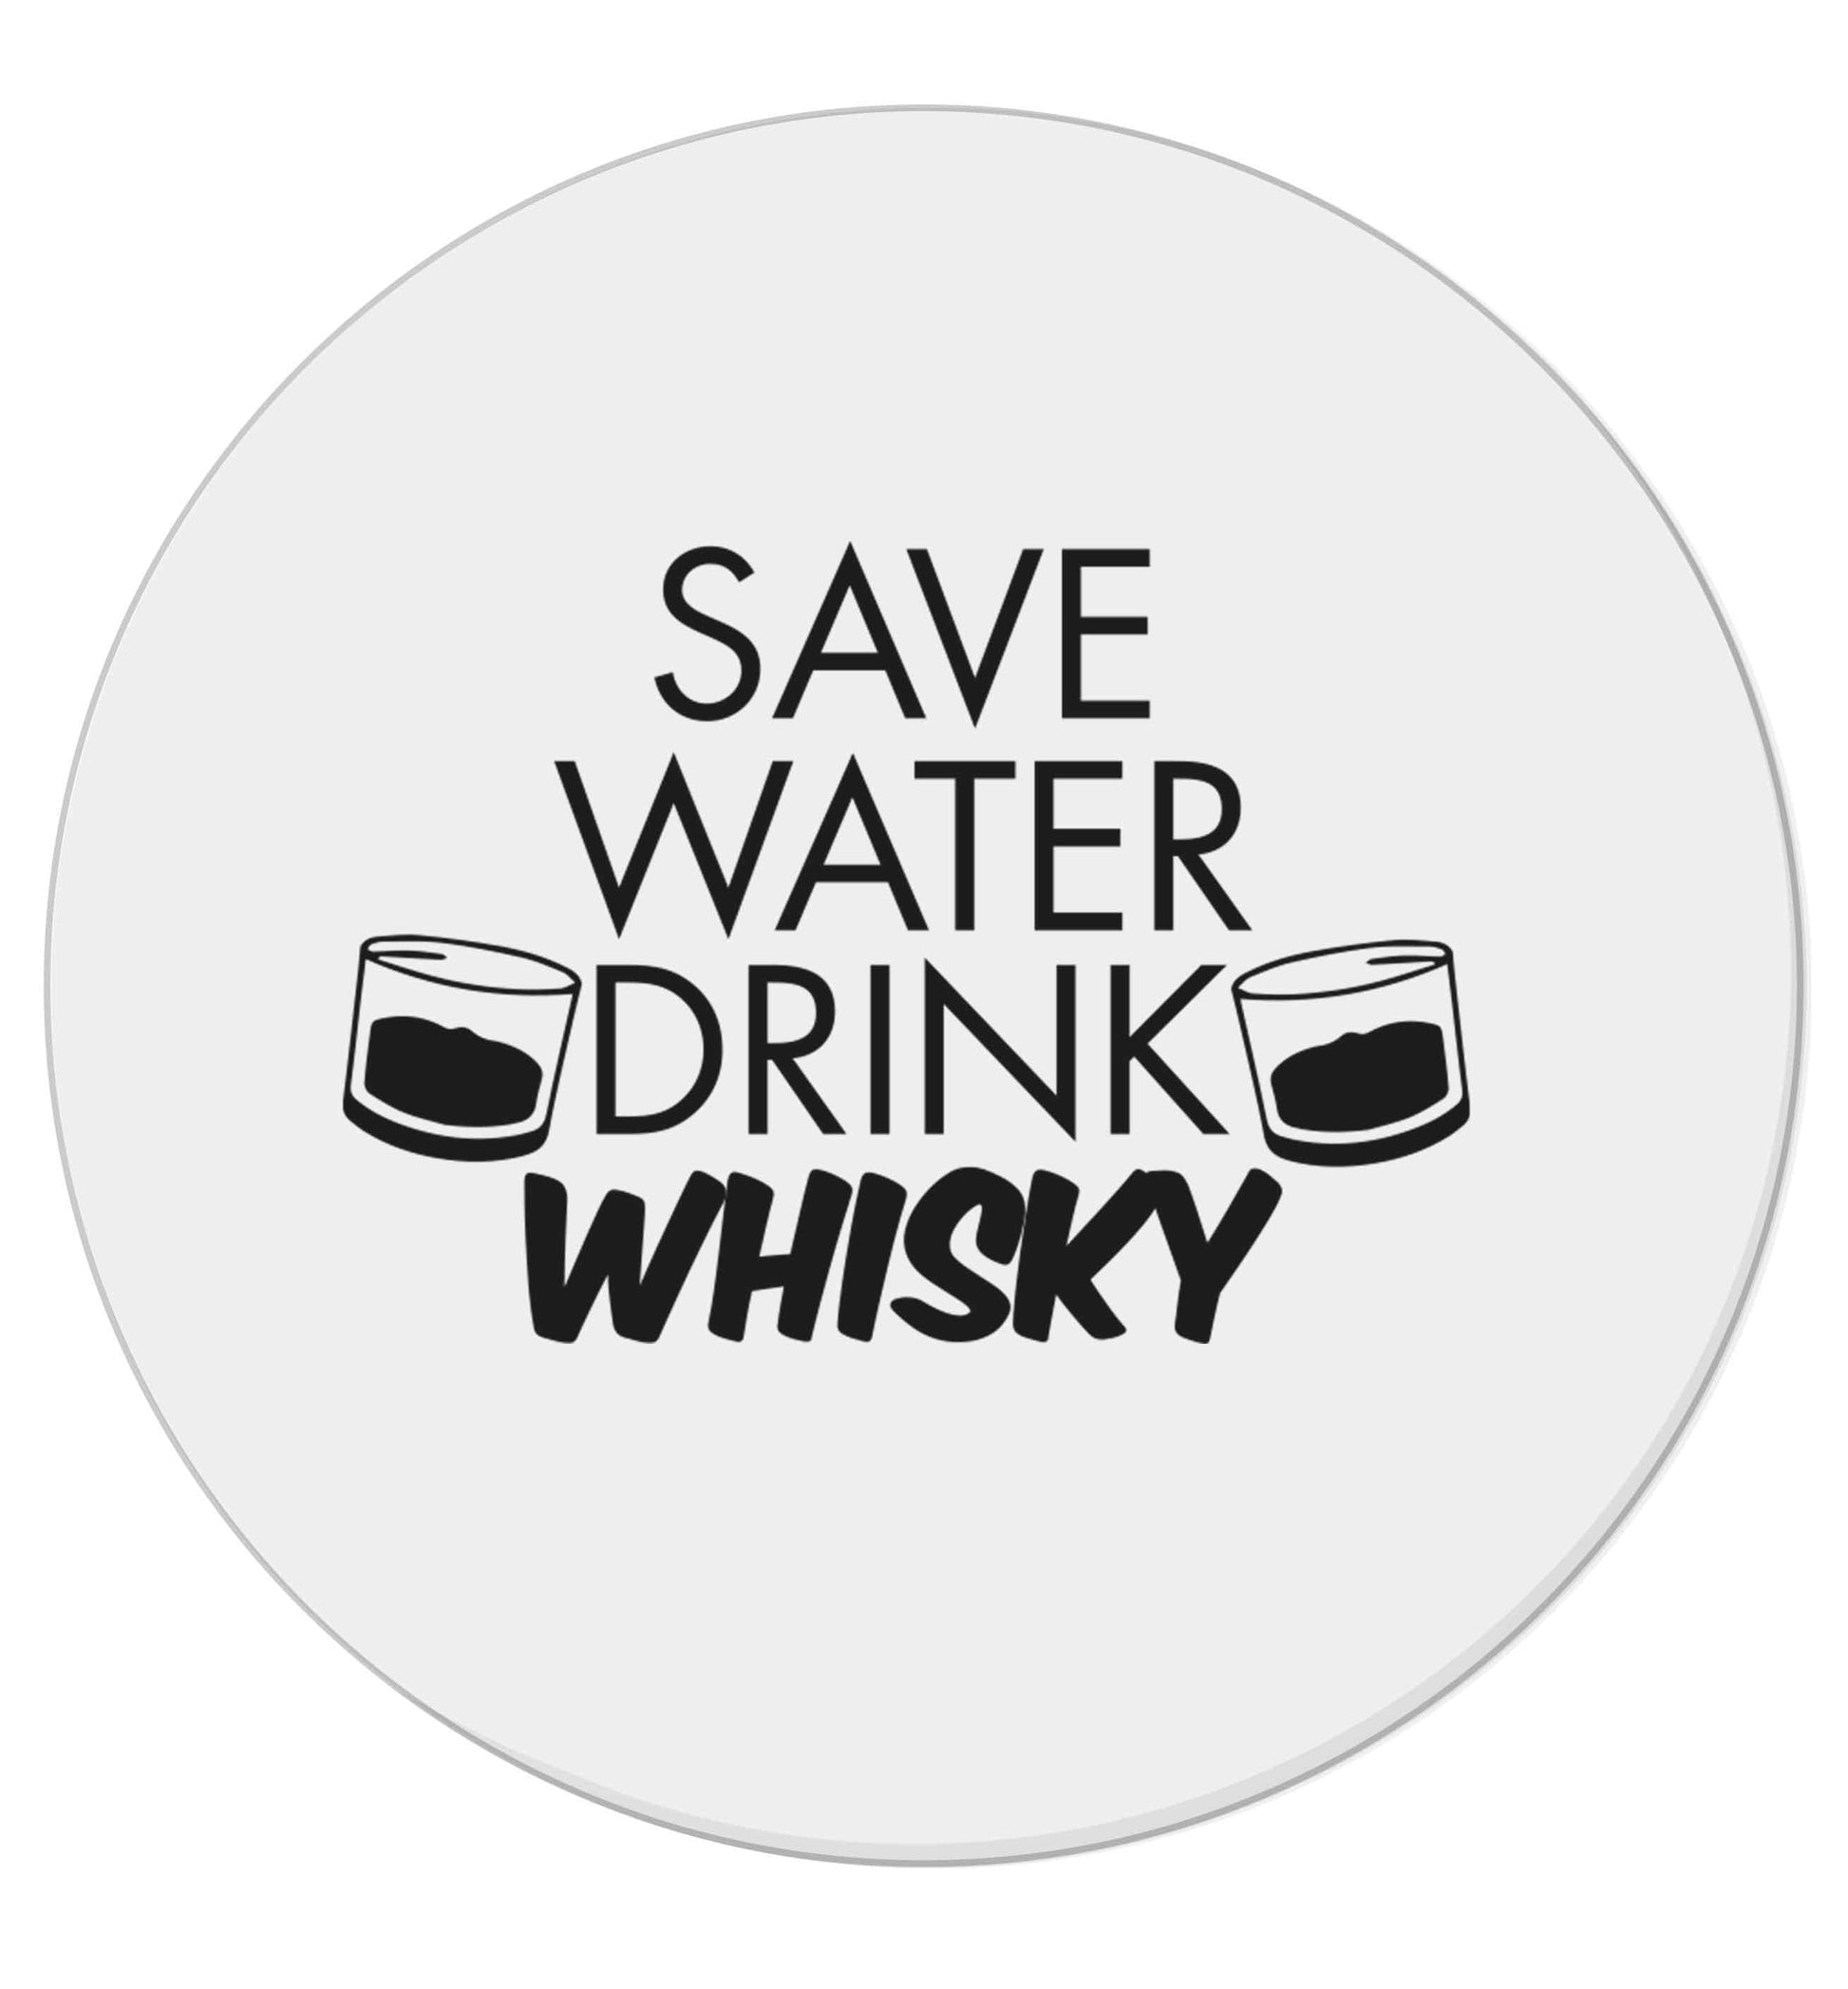 Save water drink whisky | Magnet